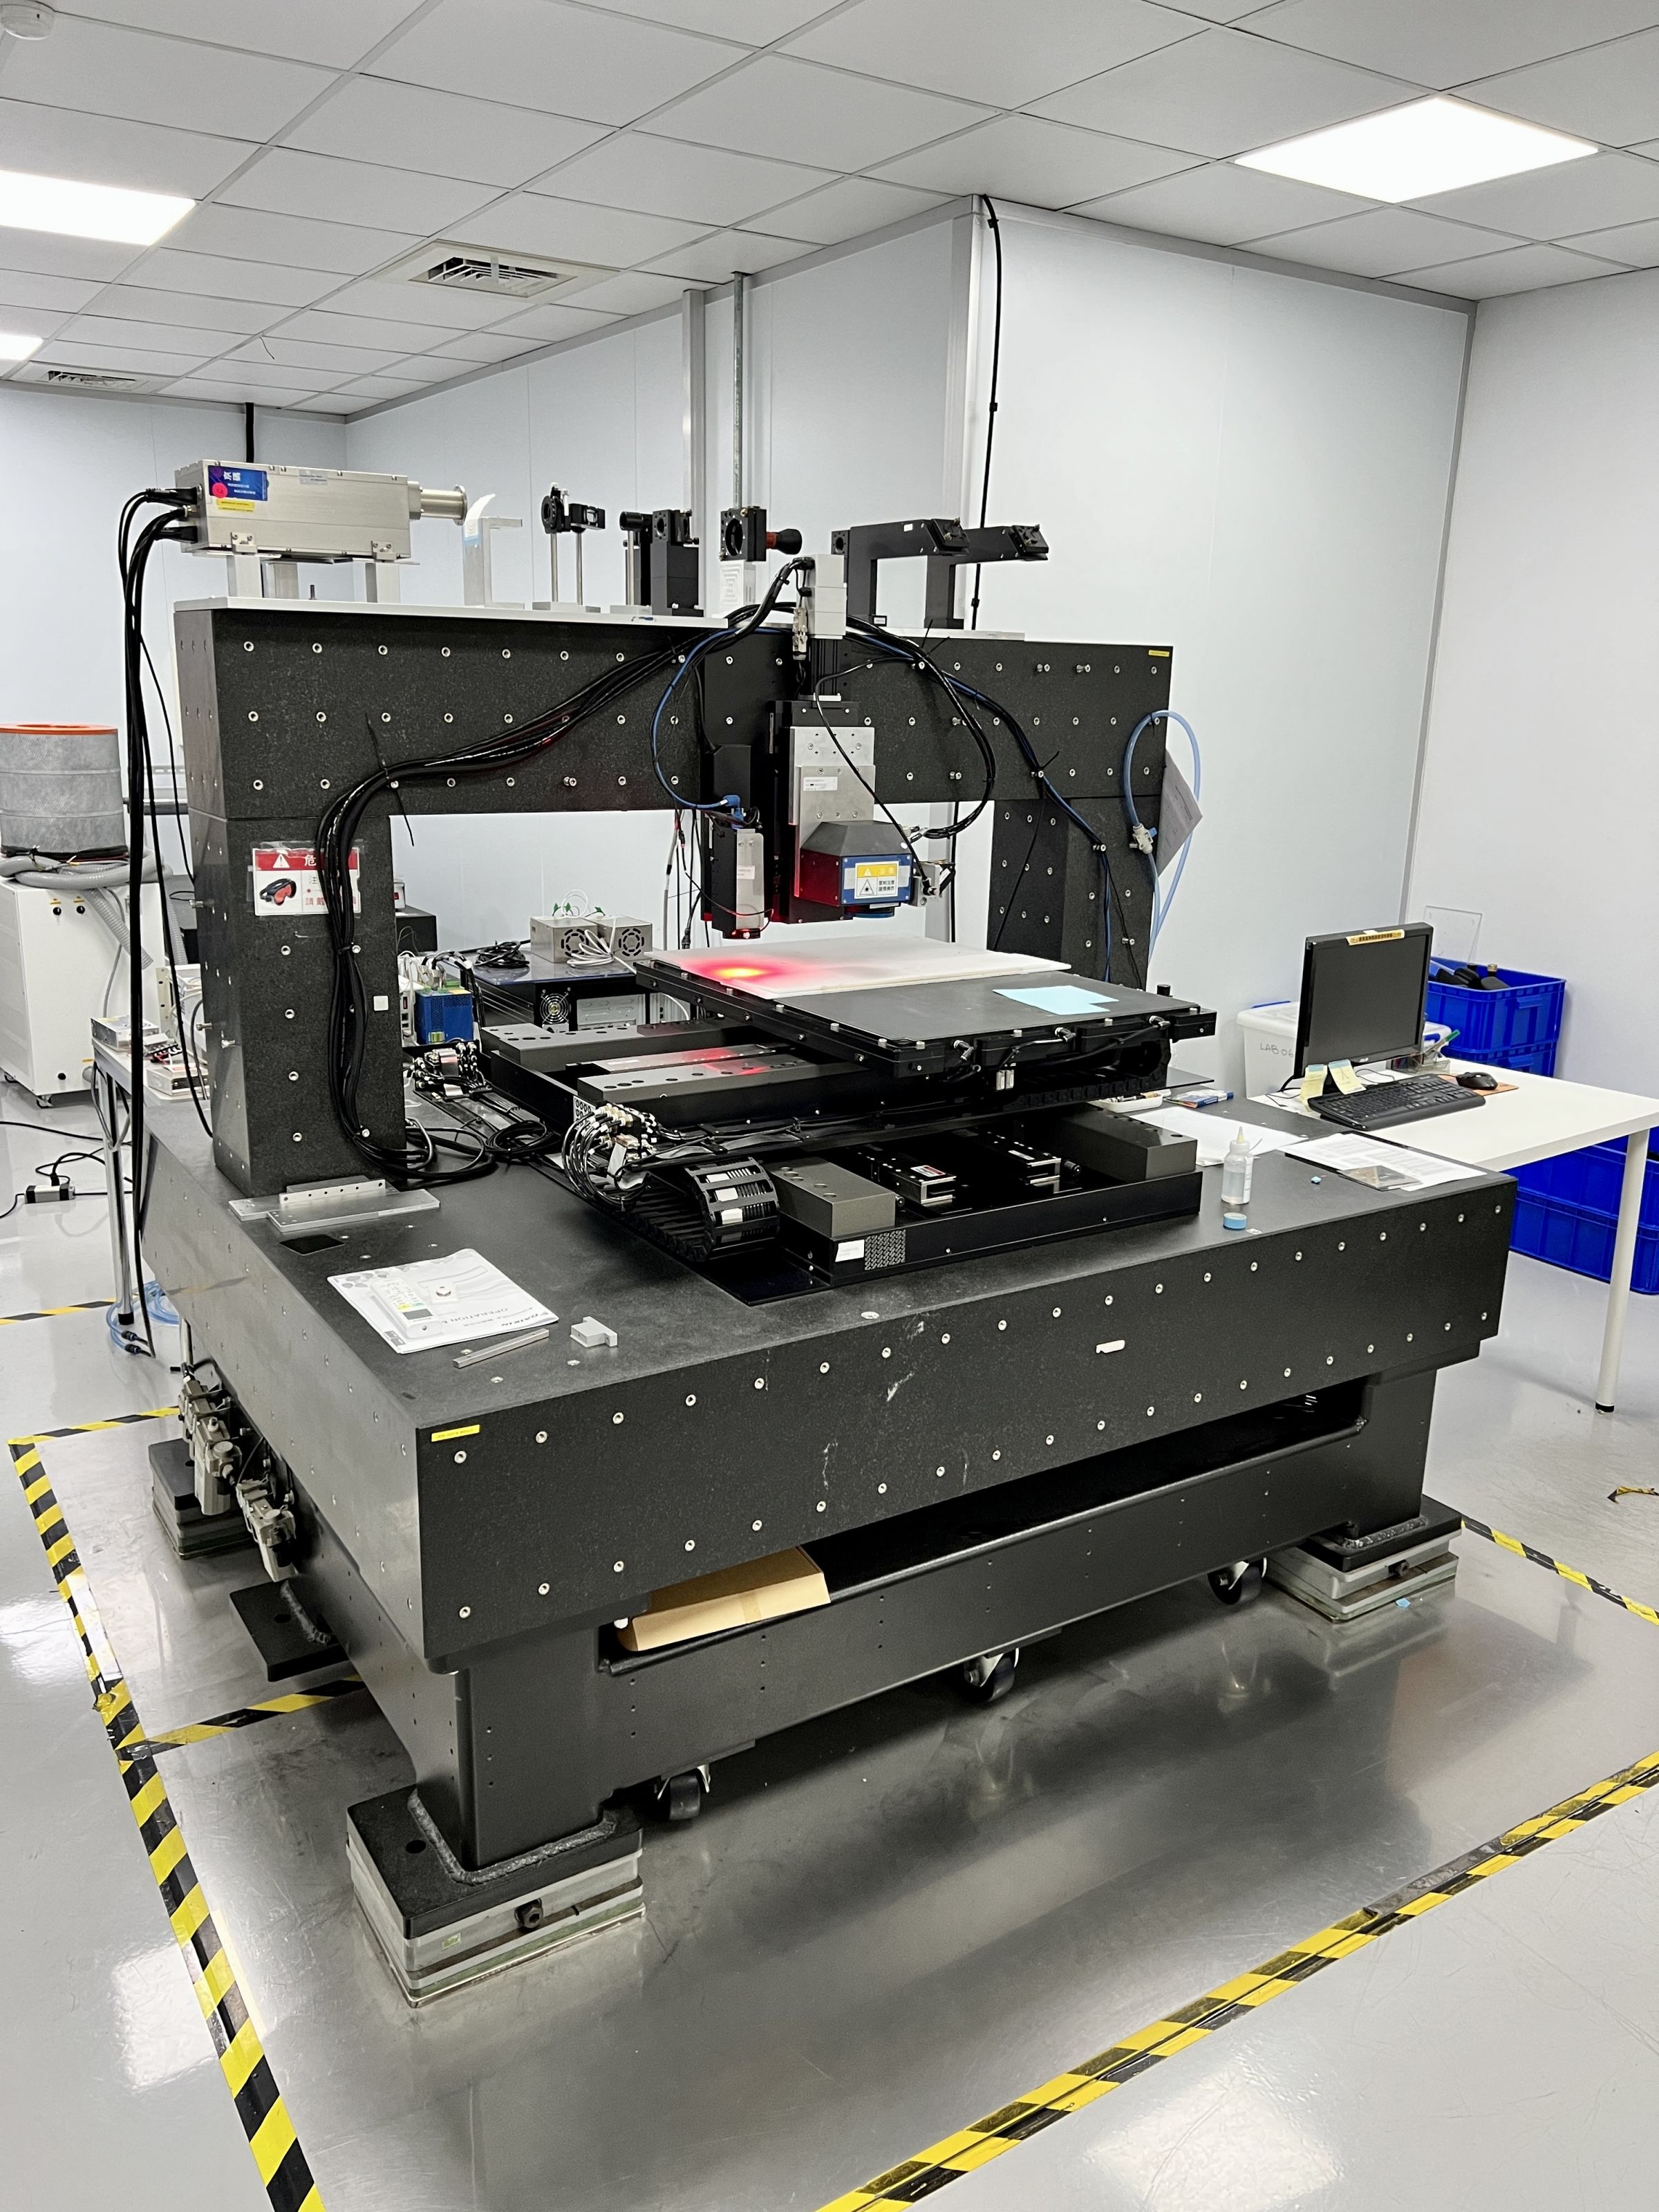 These machines can perform laser micro-etching to produce circuits for active and passive components or process composite materials.